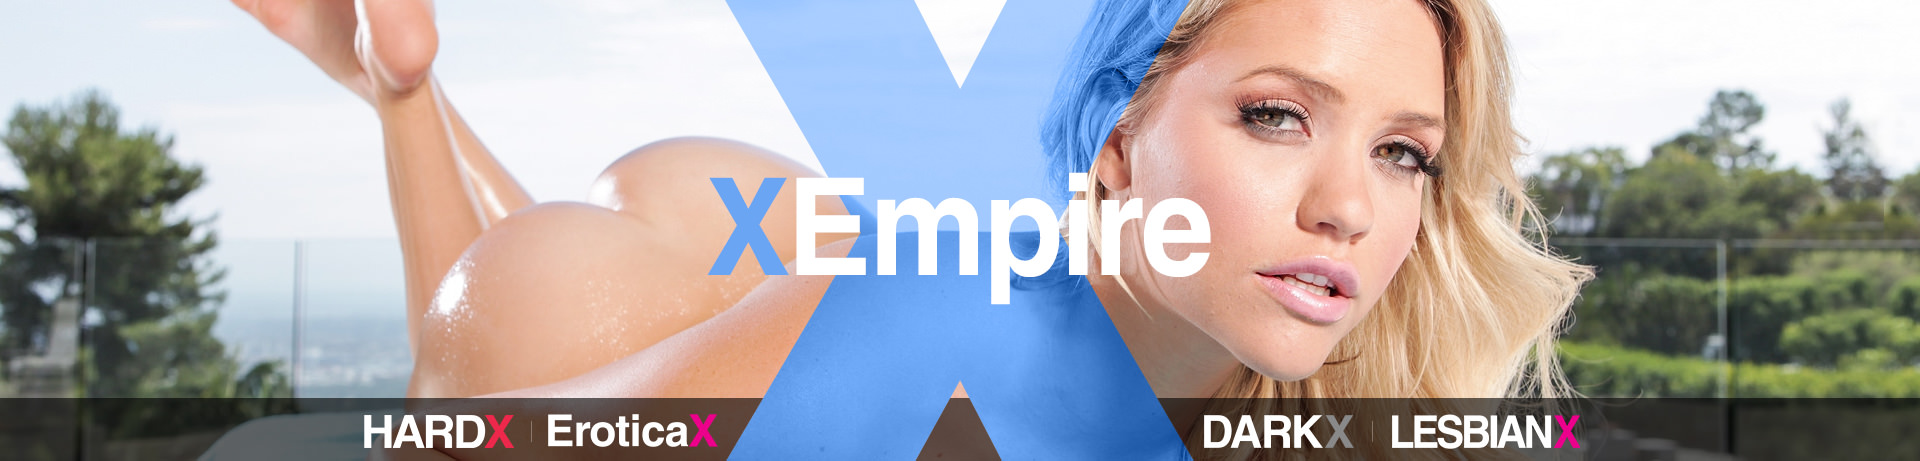 Your membership gives you access to the entire XEmpire Network of sites. For free